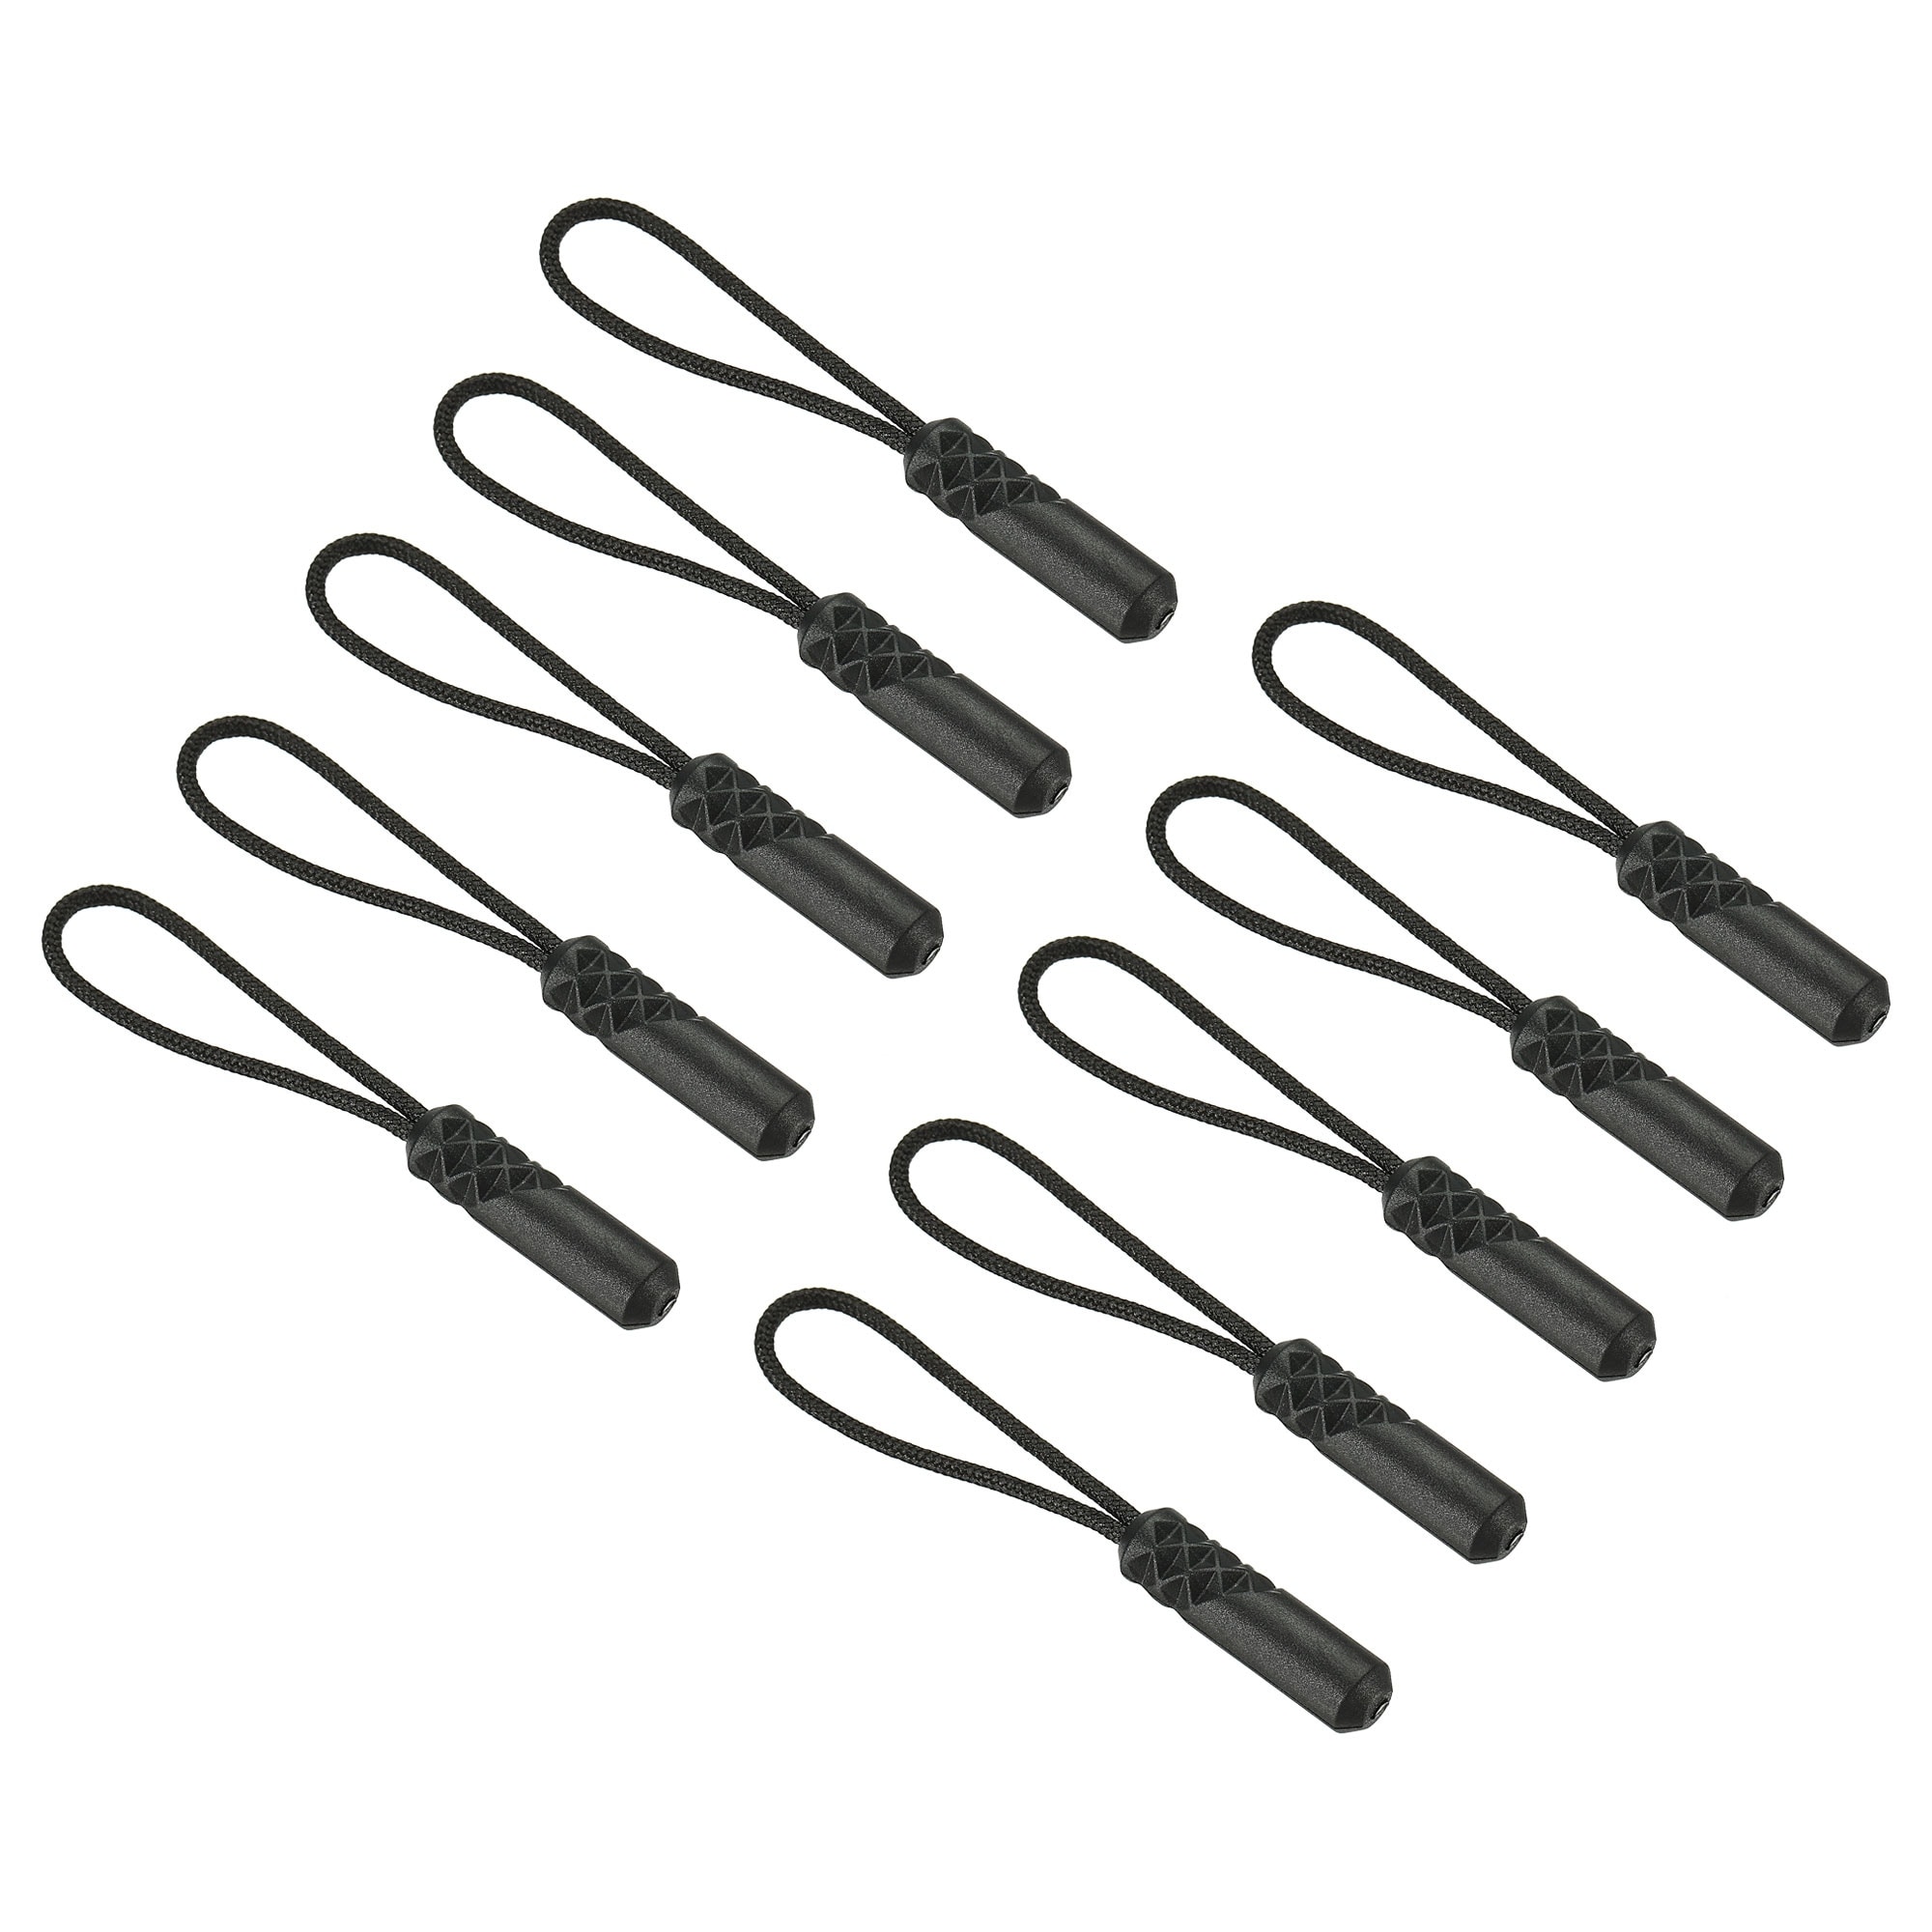 5Pcs Replacement Zipper Slider Pull Puller End Fit Rope Tag